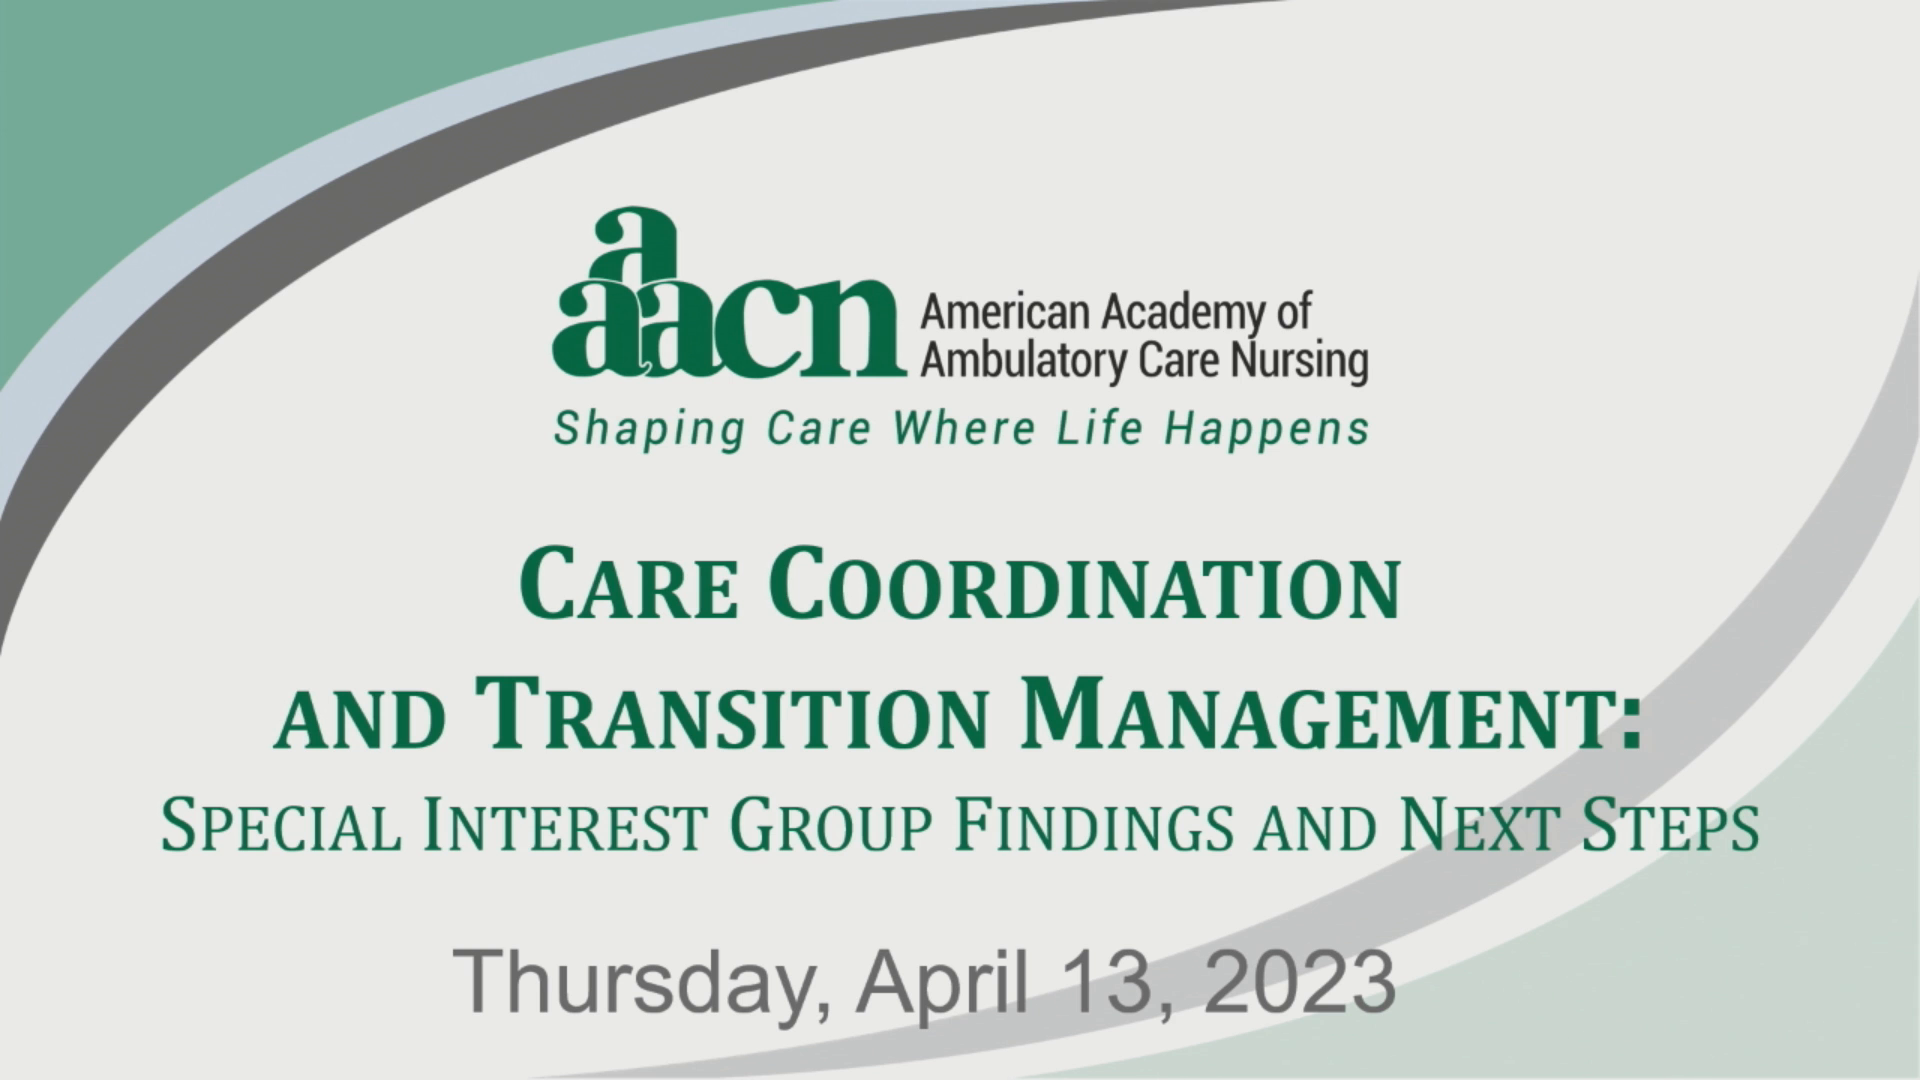 Care Coordination and Transition Management (CCTM) Special Interest Group (SIG) Session: Assessment and Evaluation of Ambulatory Care Registered Nurse Needs Regarding Care Coordination and Transition Management